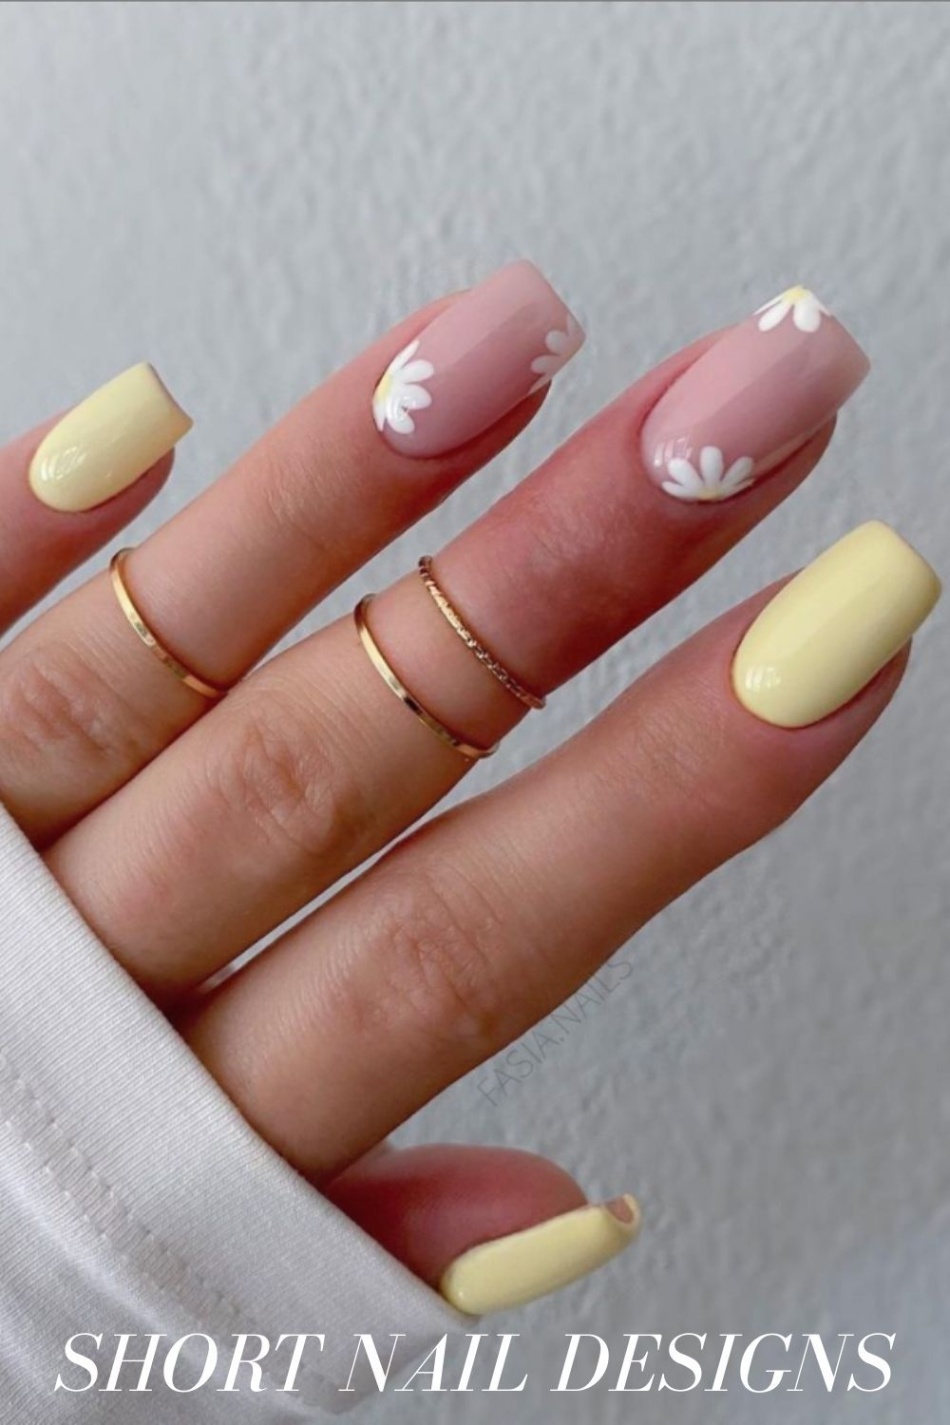 Get Creative With Short Acrylic Nail Designs For A Casual Look!